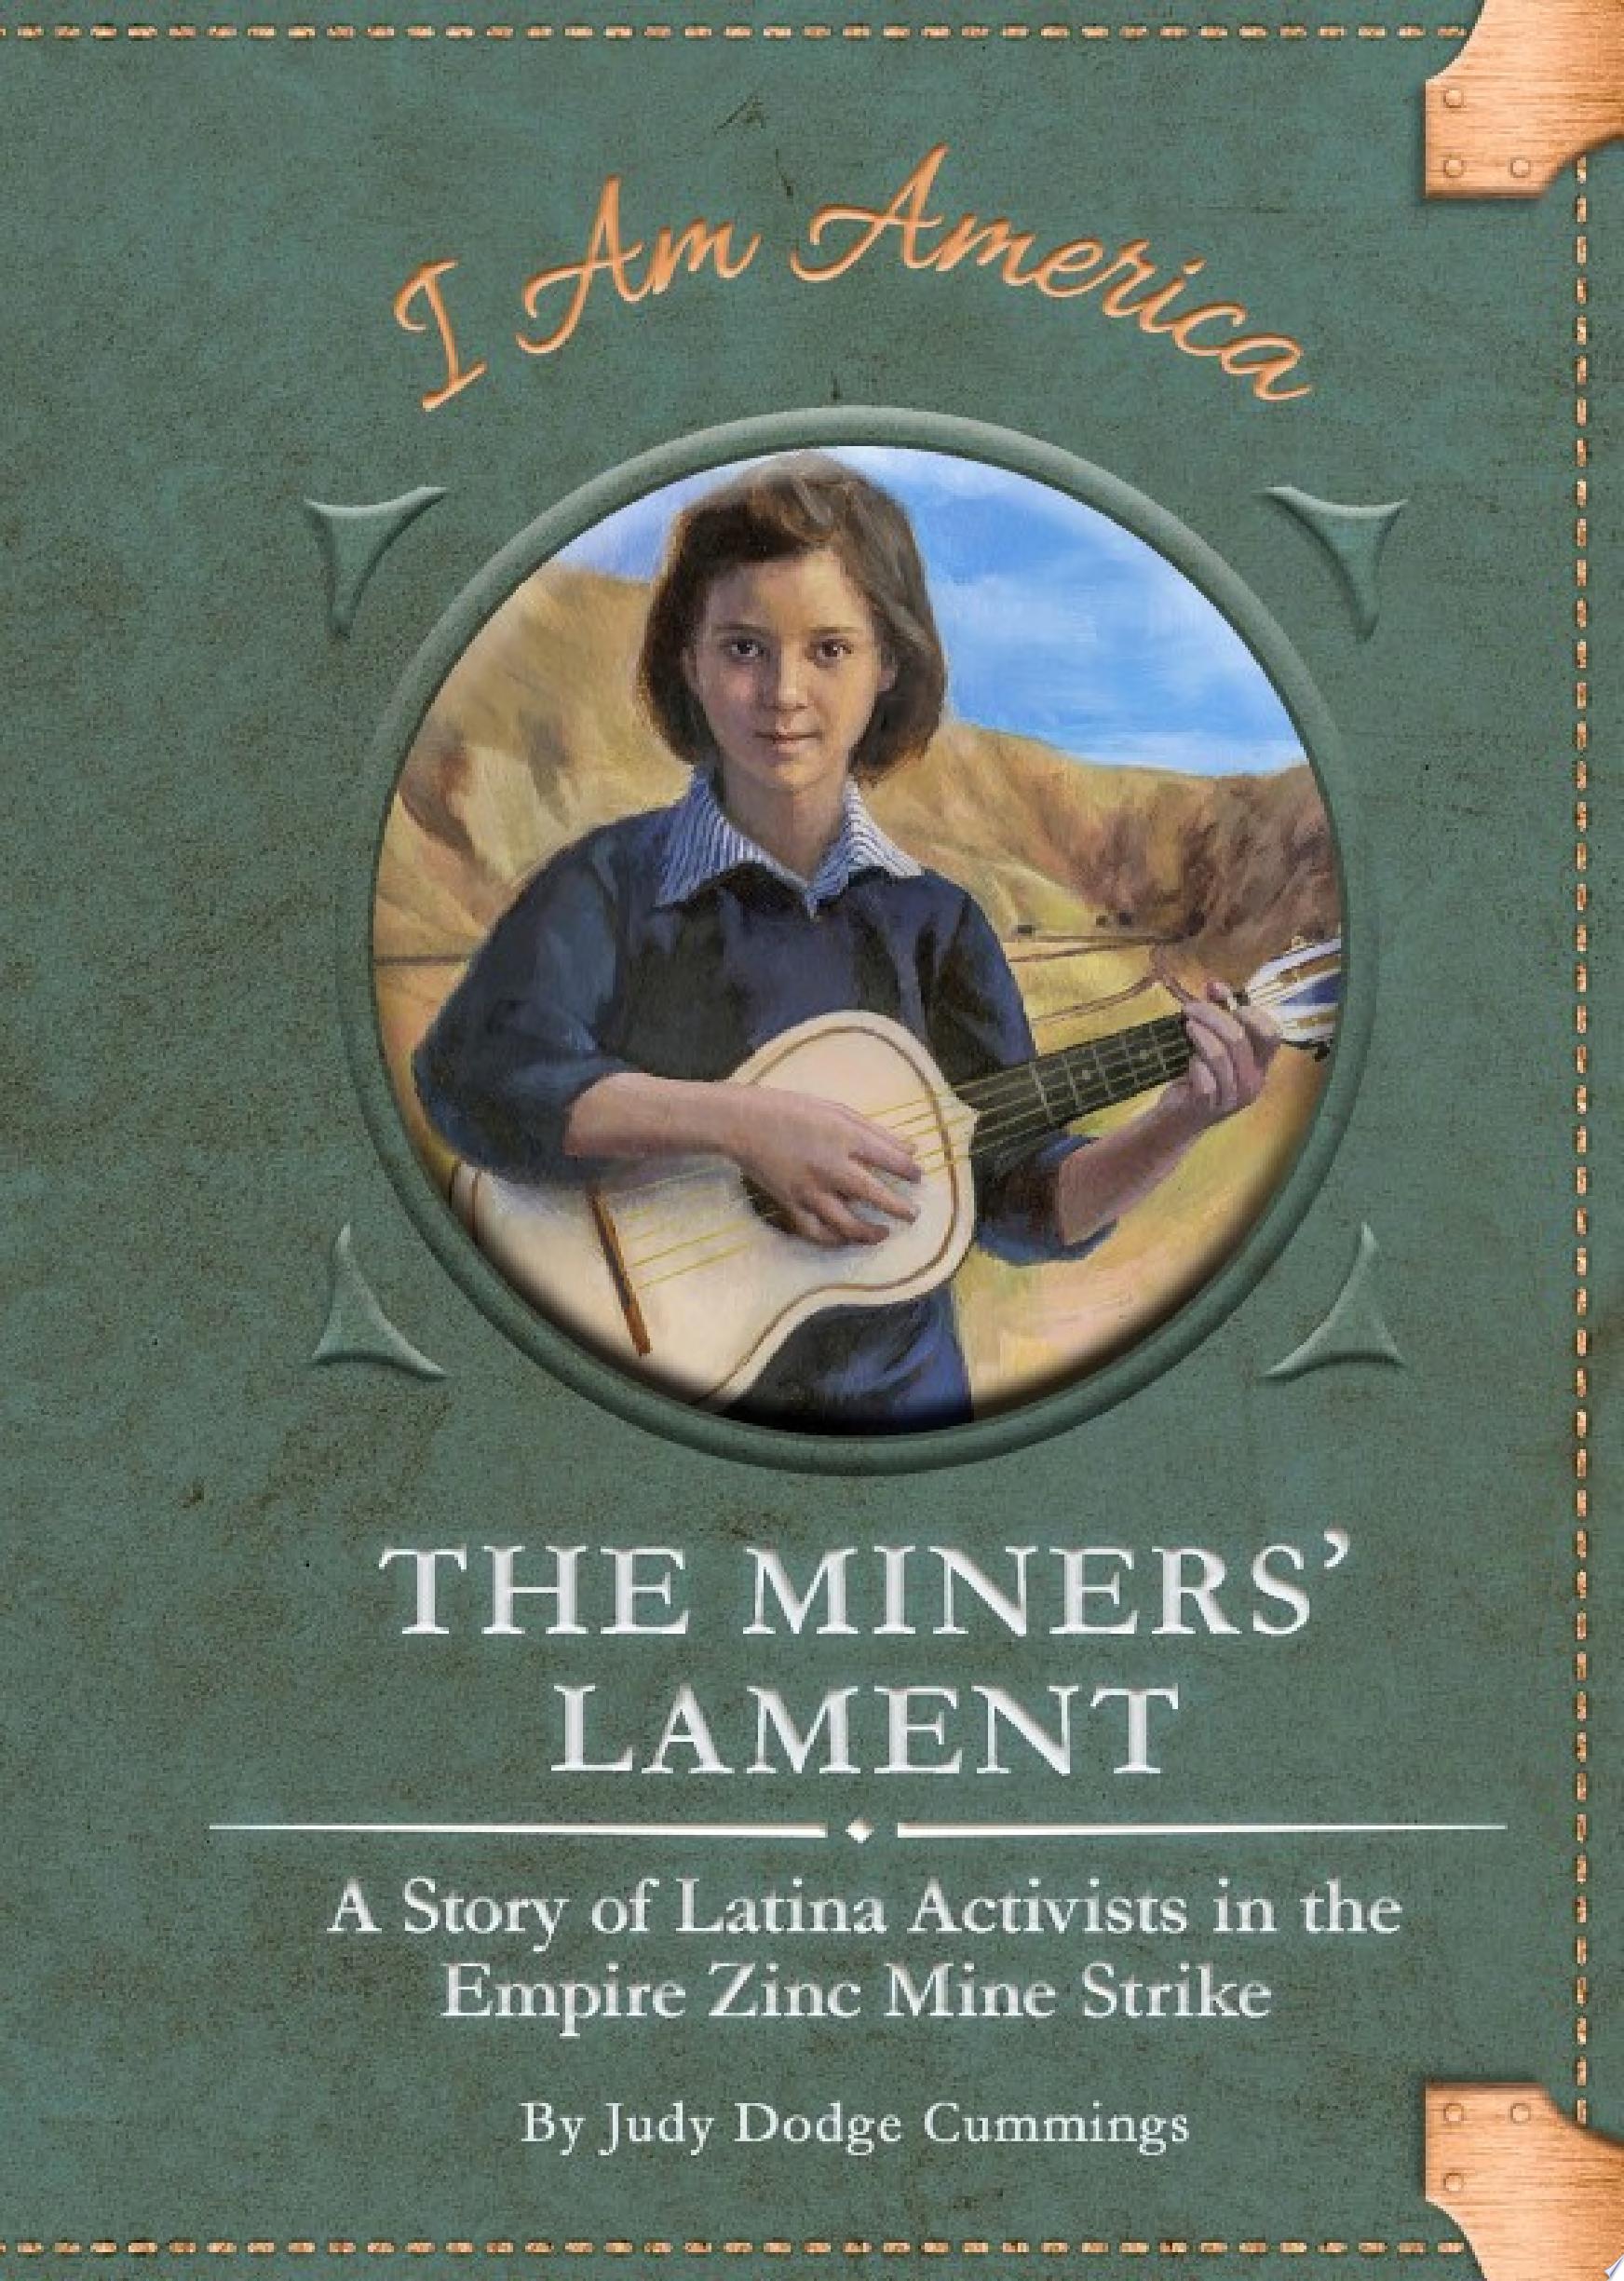 Image for "The Miner's Lament"